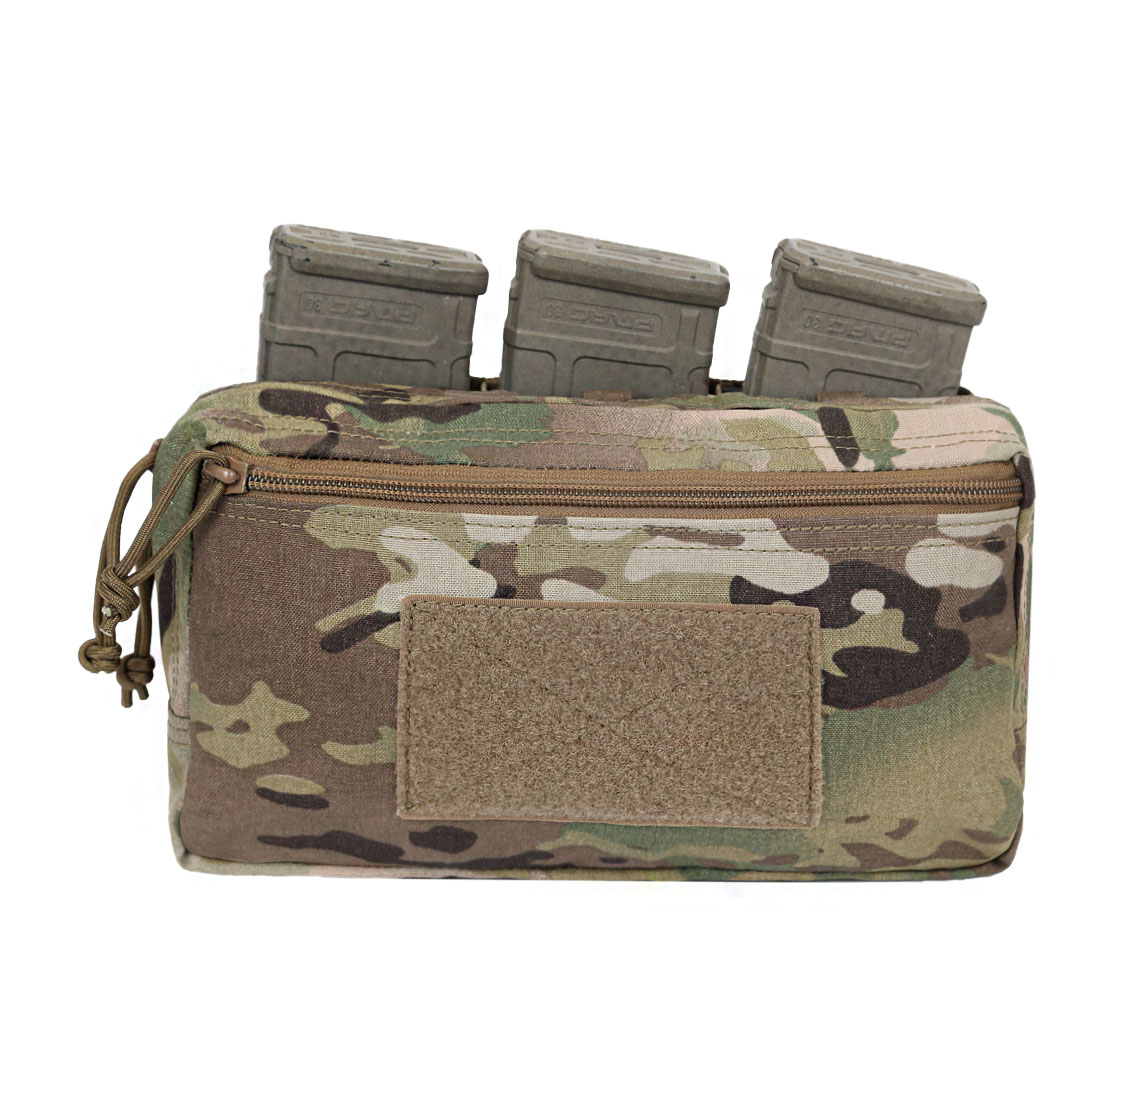 Olive Green Army Style Bag Kit Universal New Version